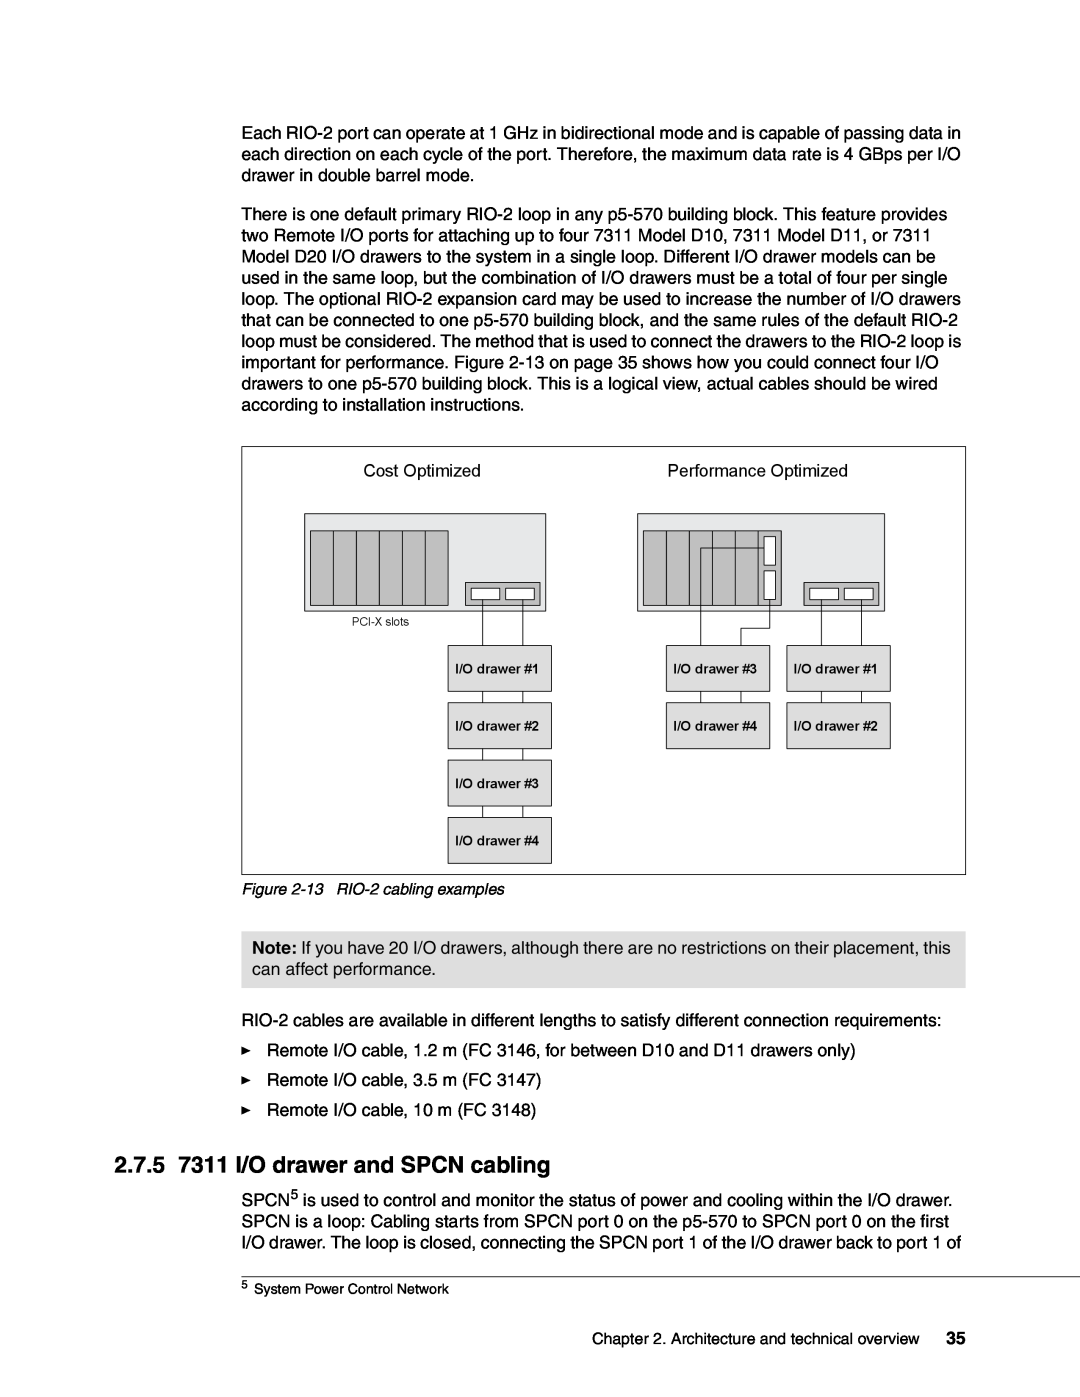 IBM P5 570 manual 2.7.57311 I/O drawer and SPCN cabling, Cost Optimized, Performance Optimized 